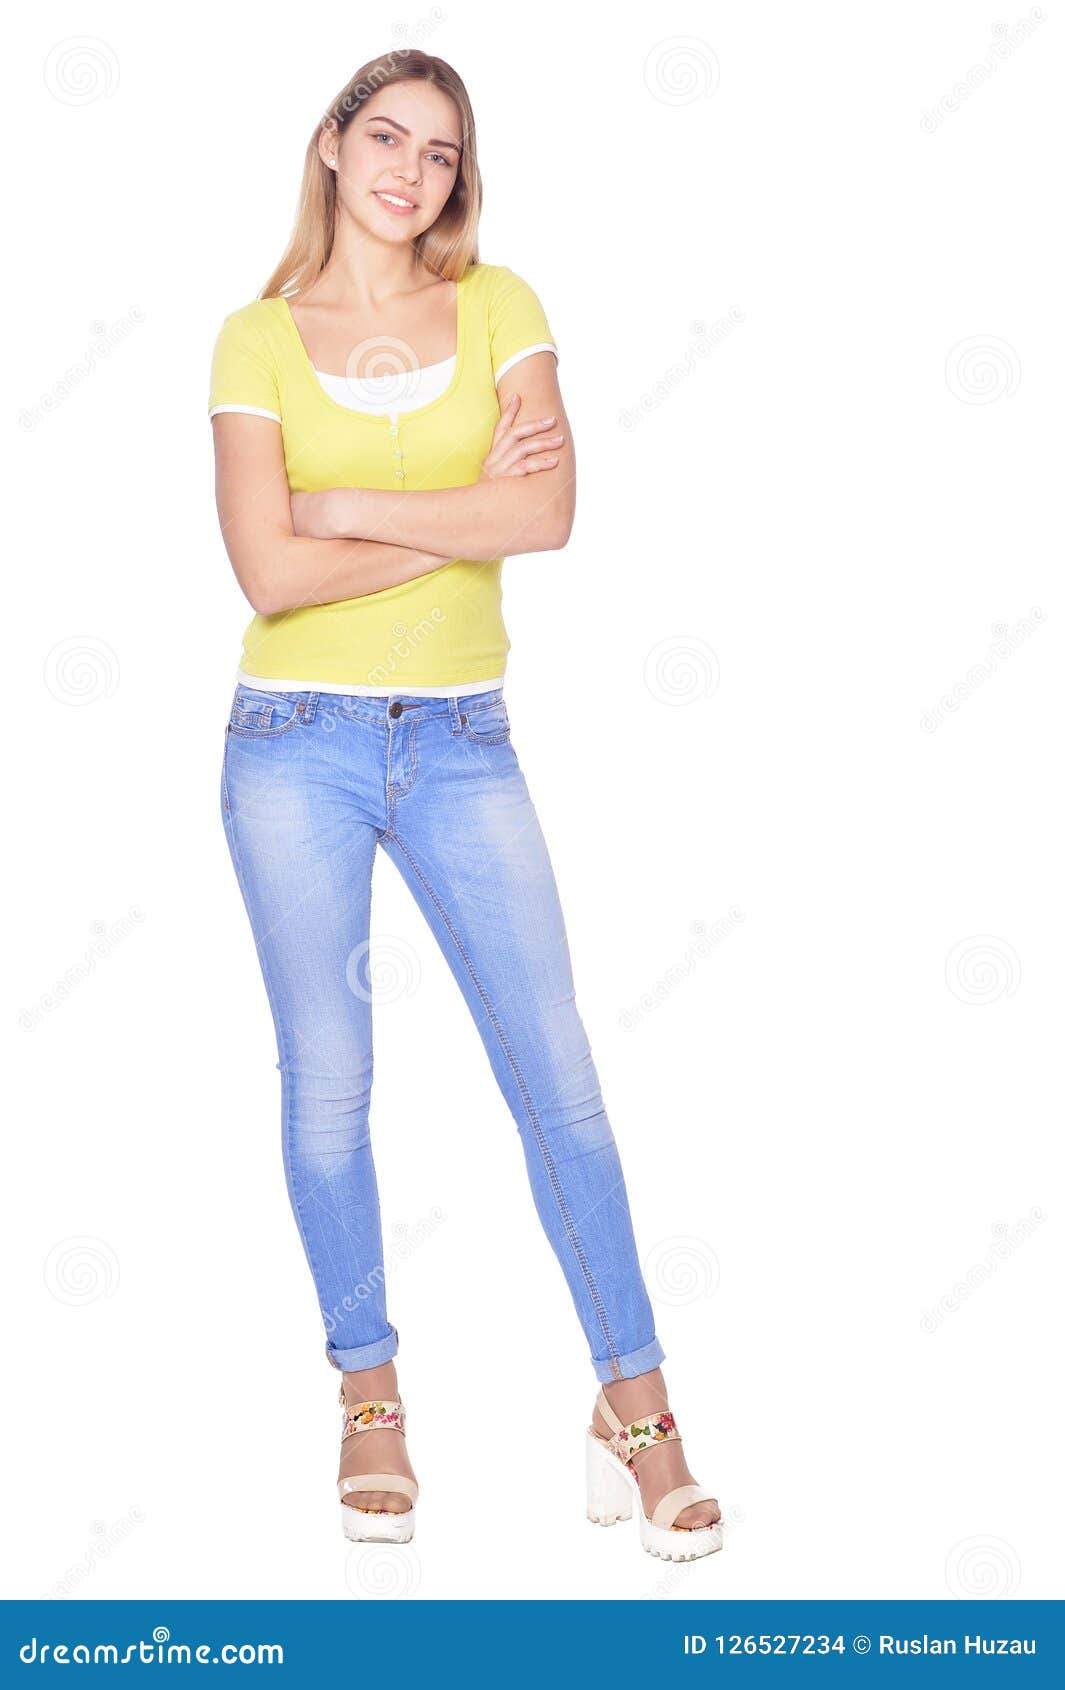 Beautiful Woman in Blue Jeans Posing on White Background Stock Photo ...